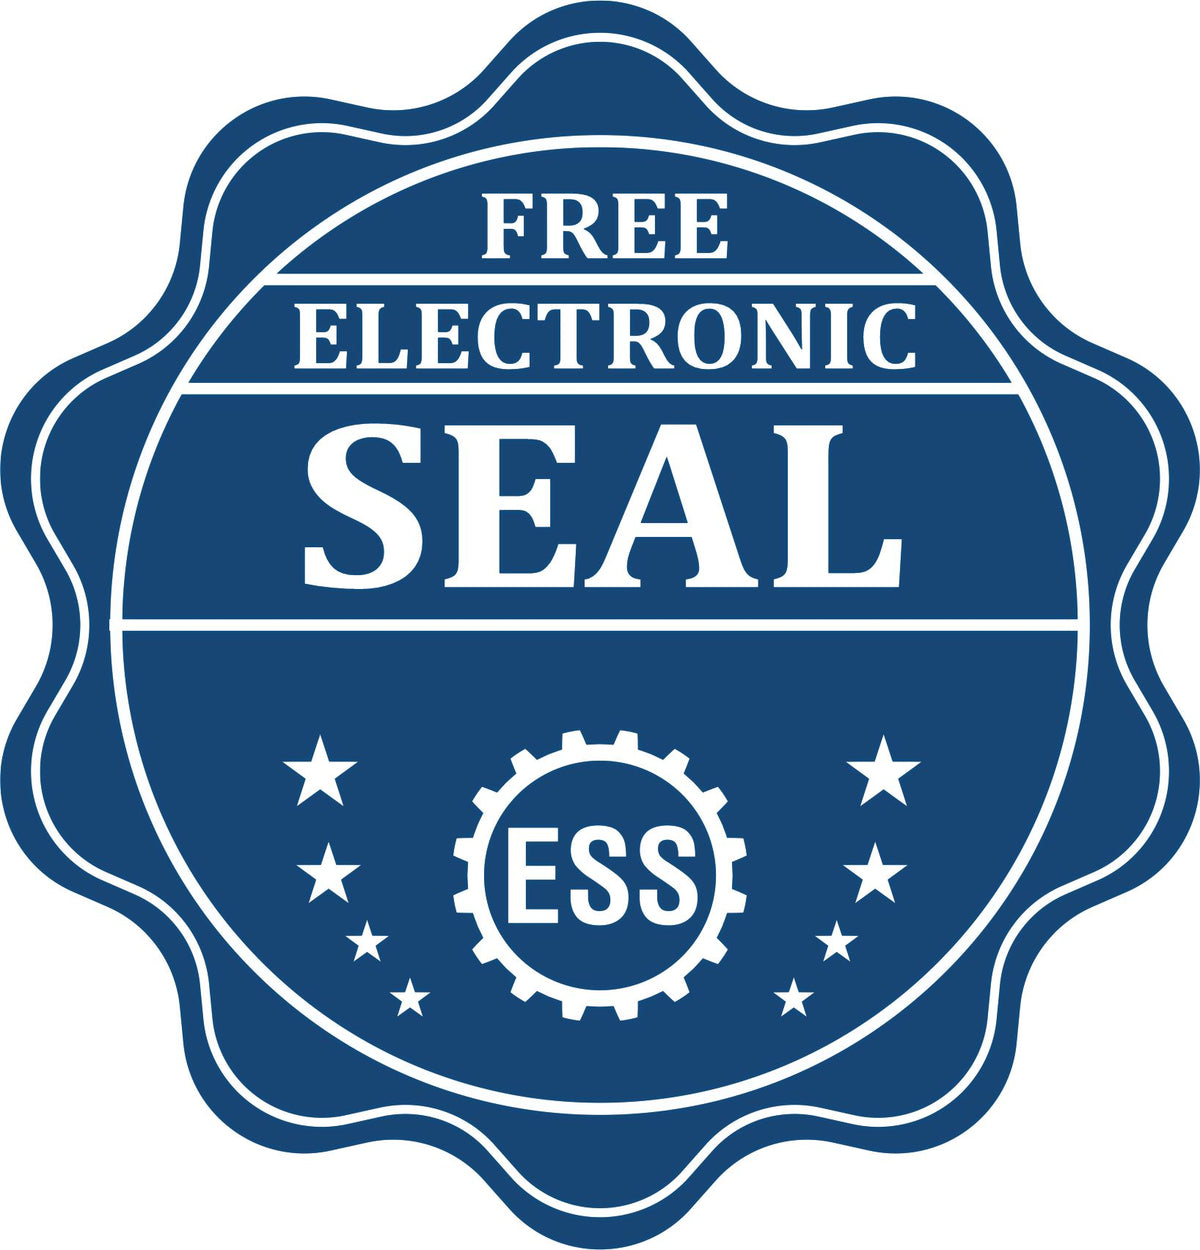 A badge showing a free electronic seal for the Montana Desk Surveyor Seal Embosser with stars and the ESS gear on the emblem.